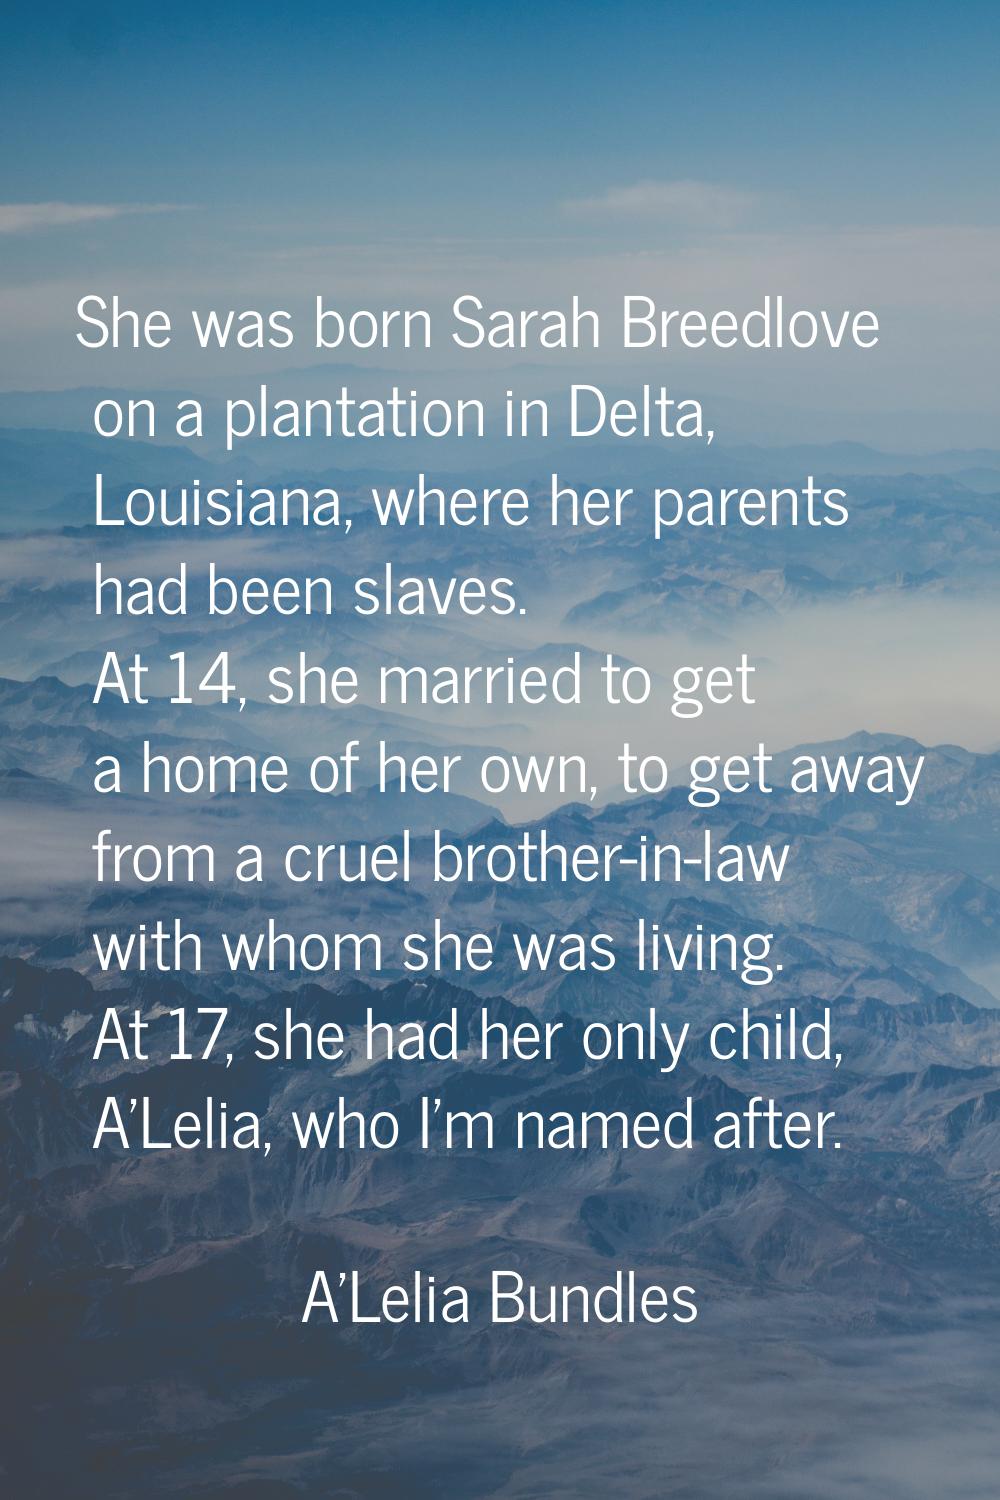 She was born Sarah Breedlove on a plantation in Delta, Louisiana, where her parents had been slaves